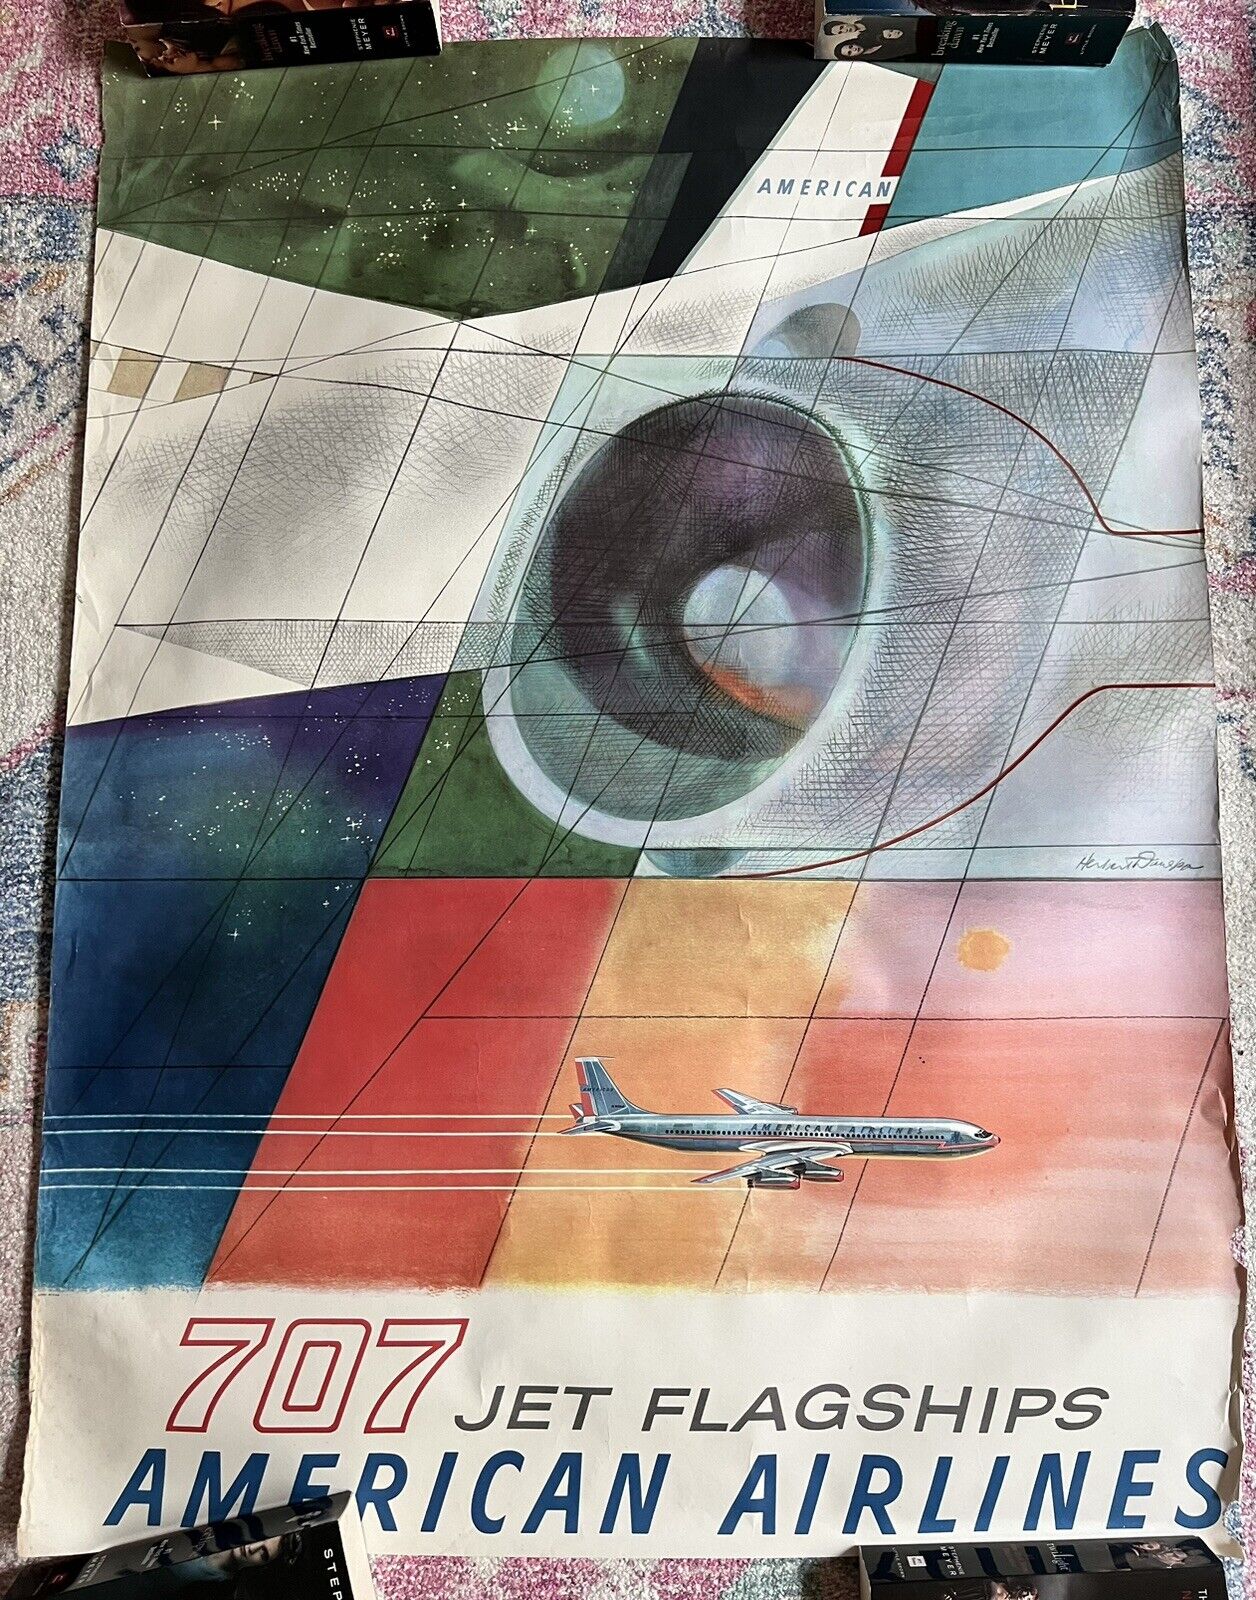 Vintage American Airlines 707 Aerojet Jet Airplane Adverting Travel Poster Old